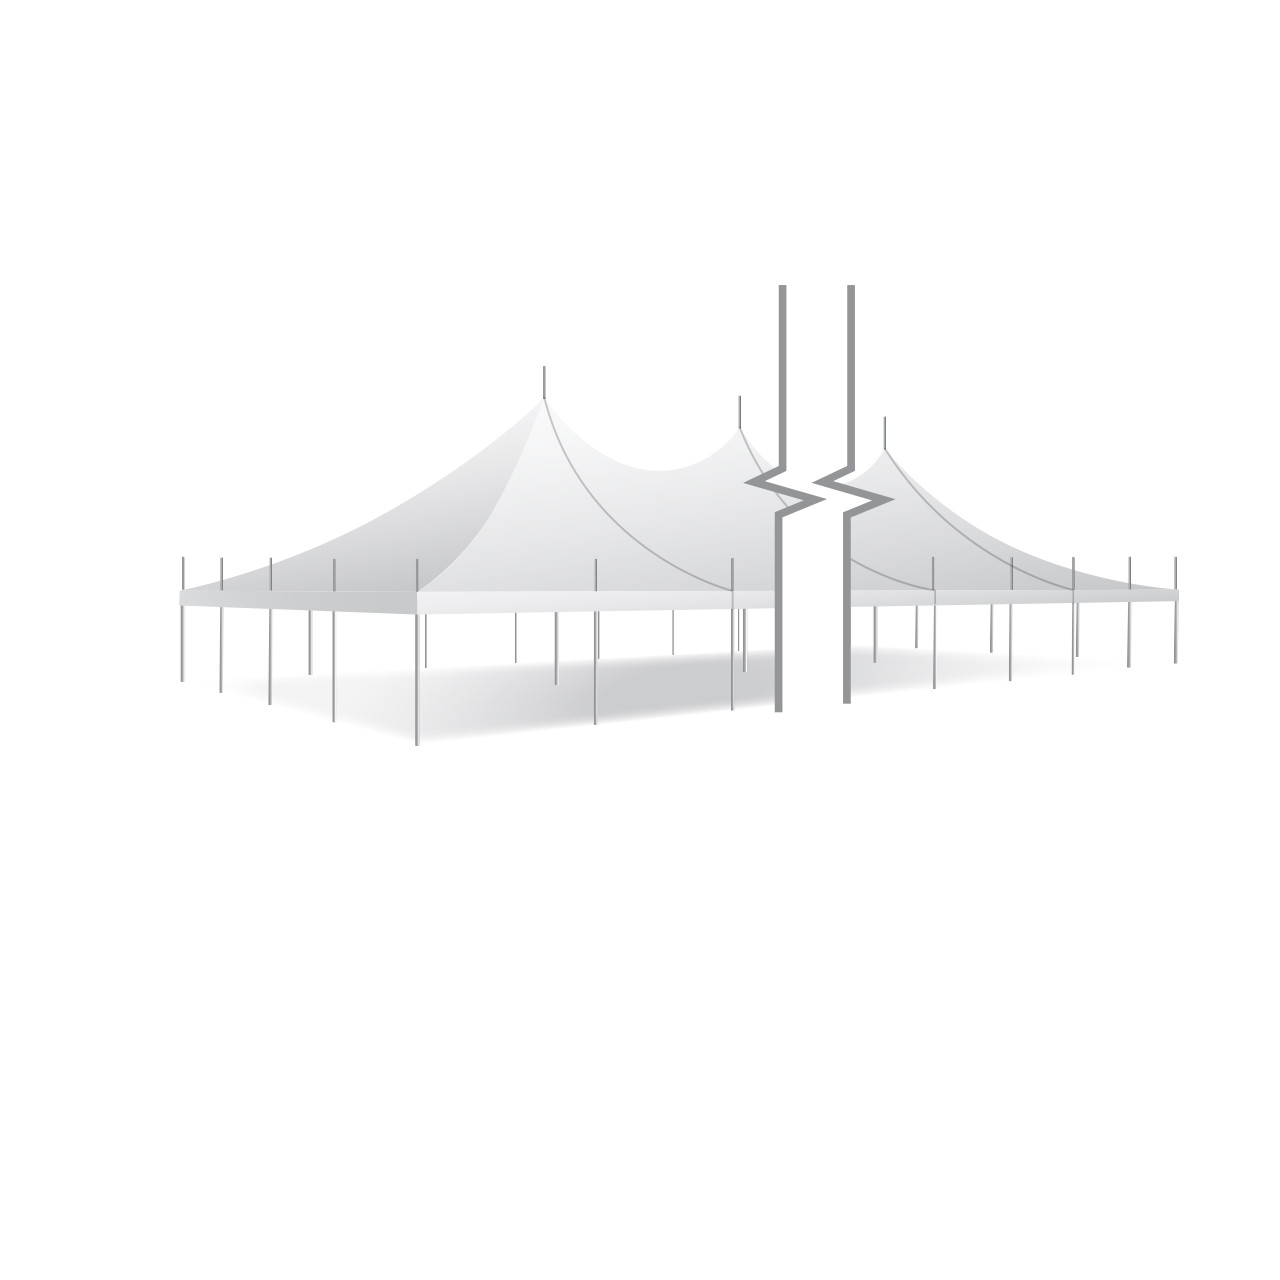 40' x 160' Premiere I Series High Peak Pole Tent, Sectional Tent Top, Complete